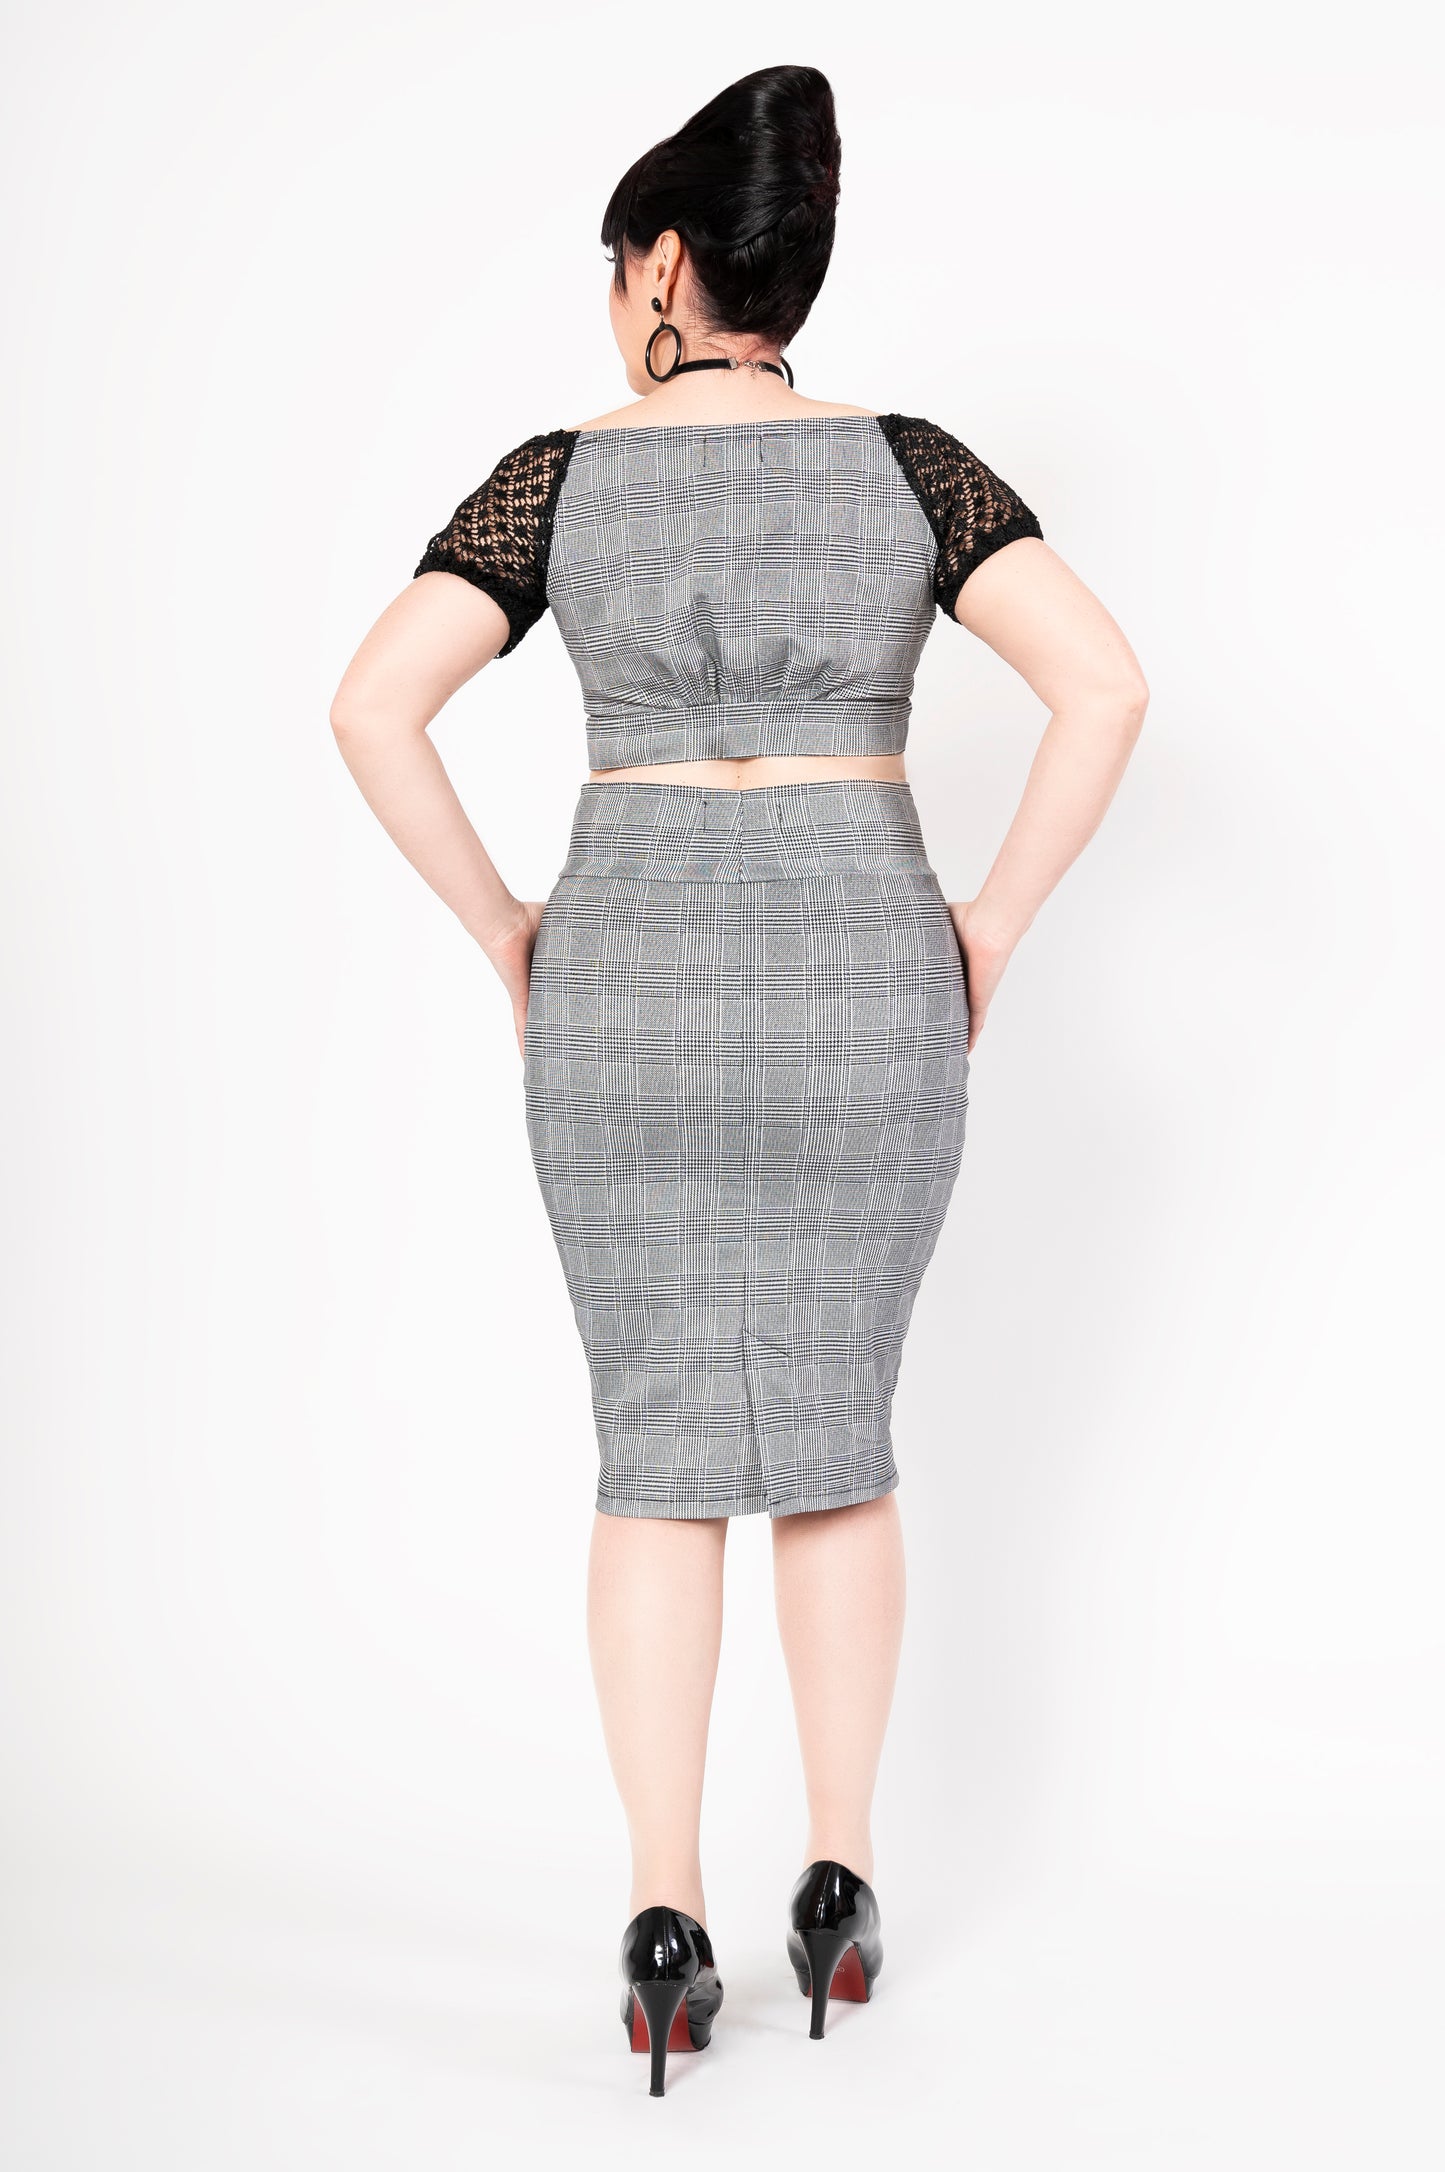 Bardot top - houndstooth square patterns